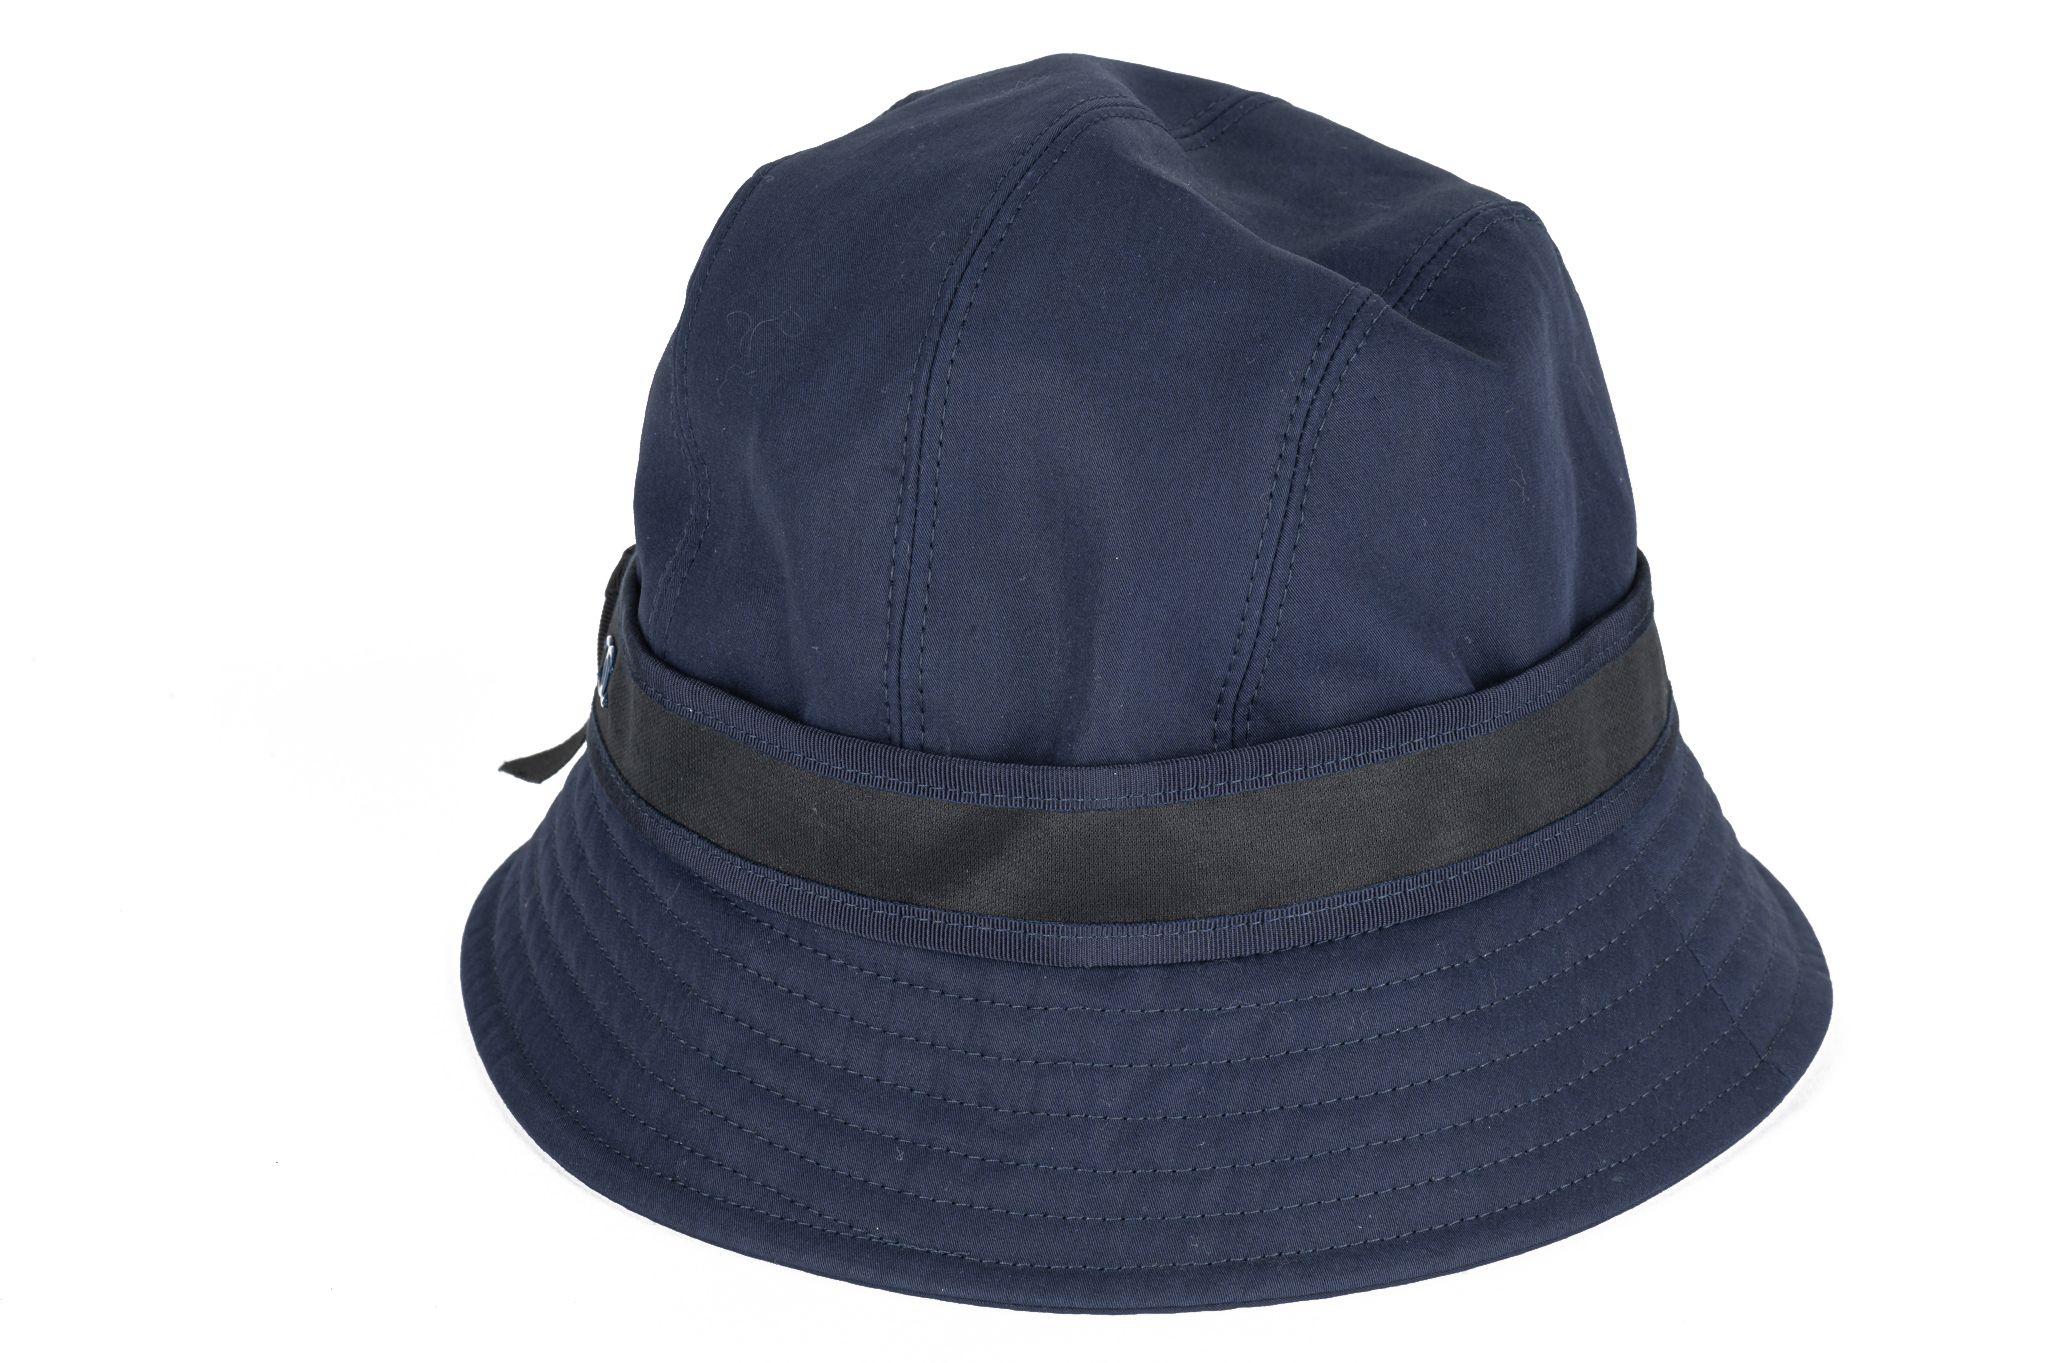 Chanel new blue bucket hat with black ribbon. Label 57 European size, us size 7 1-8. 97% cotton, 3% viscose. Comes with original box.